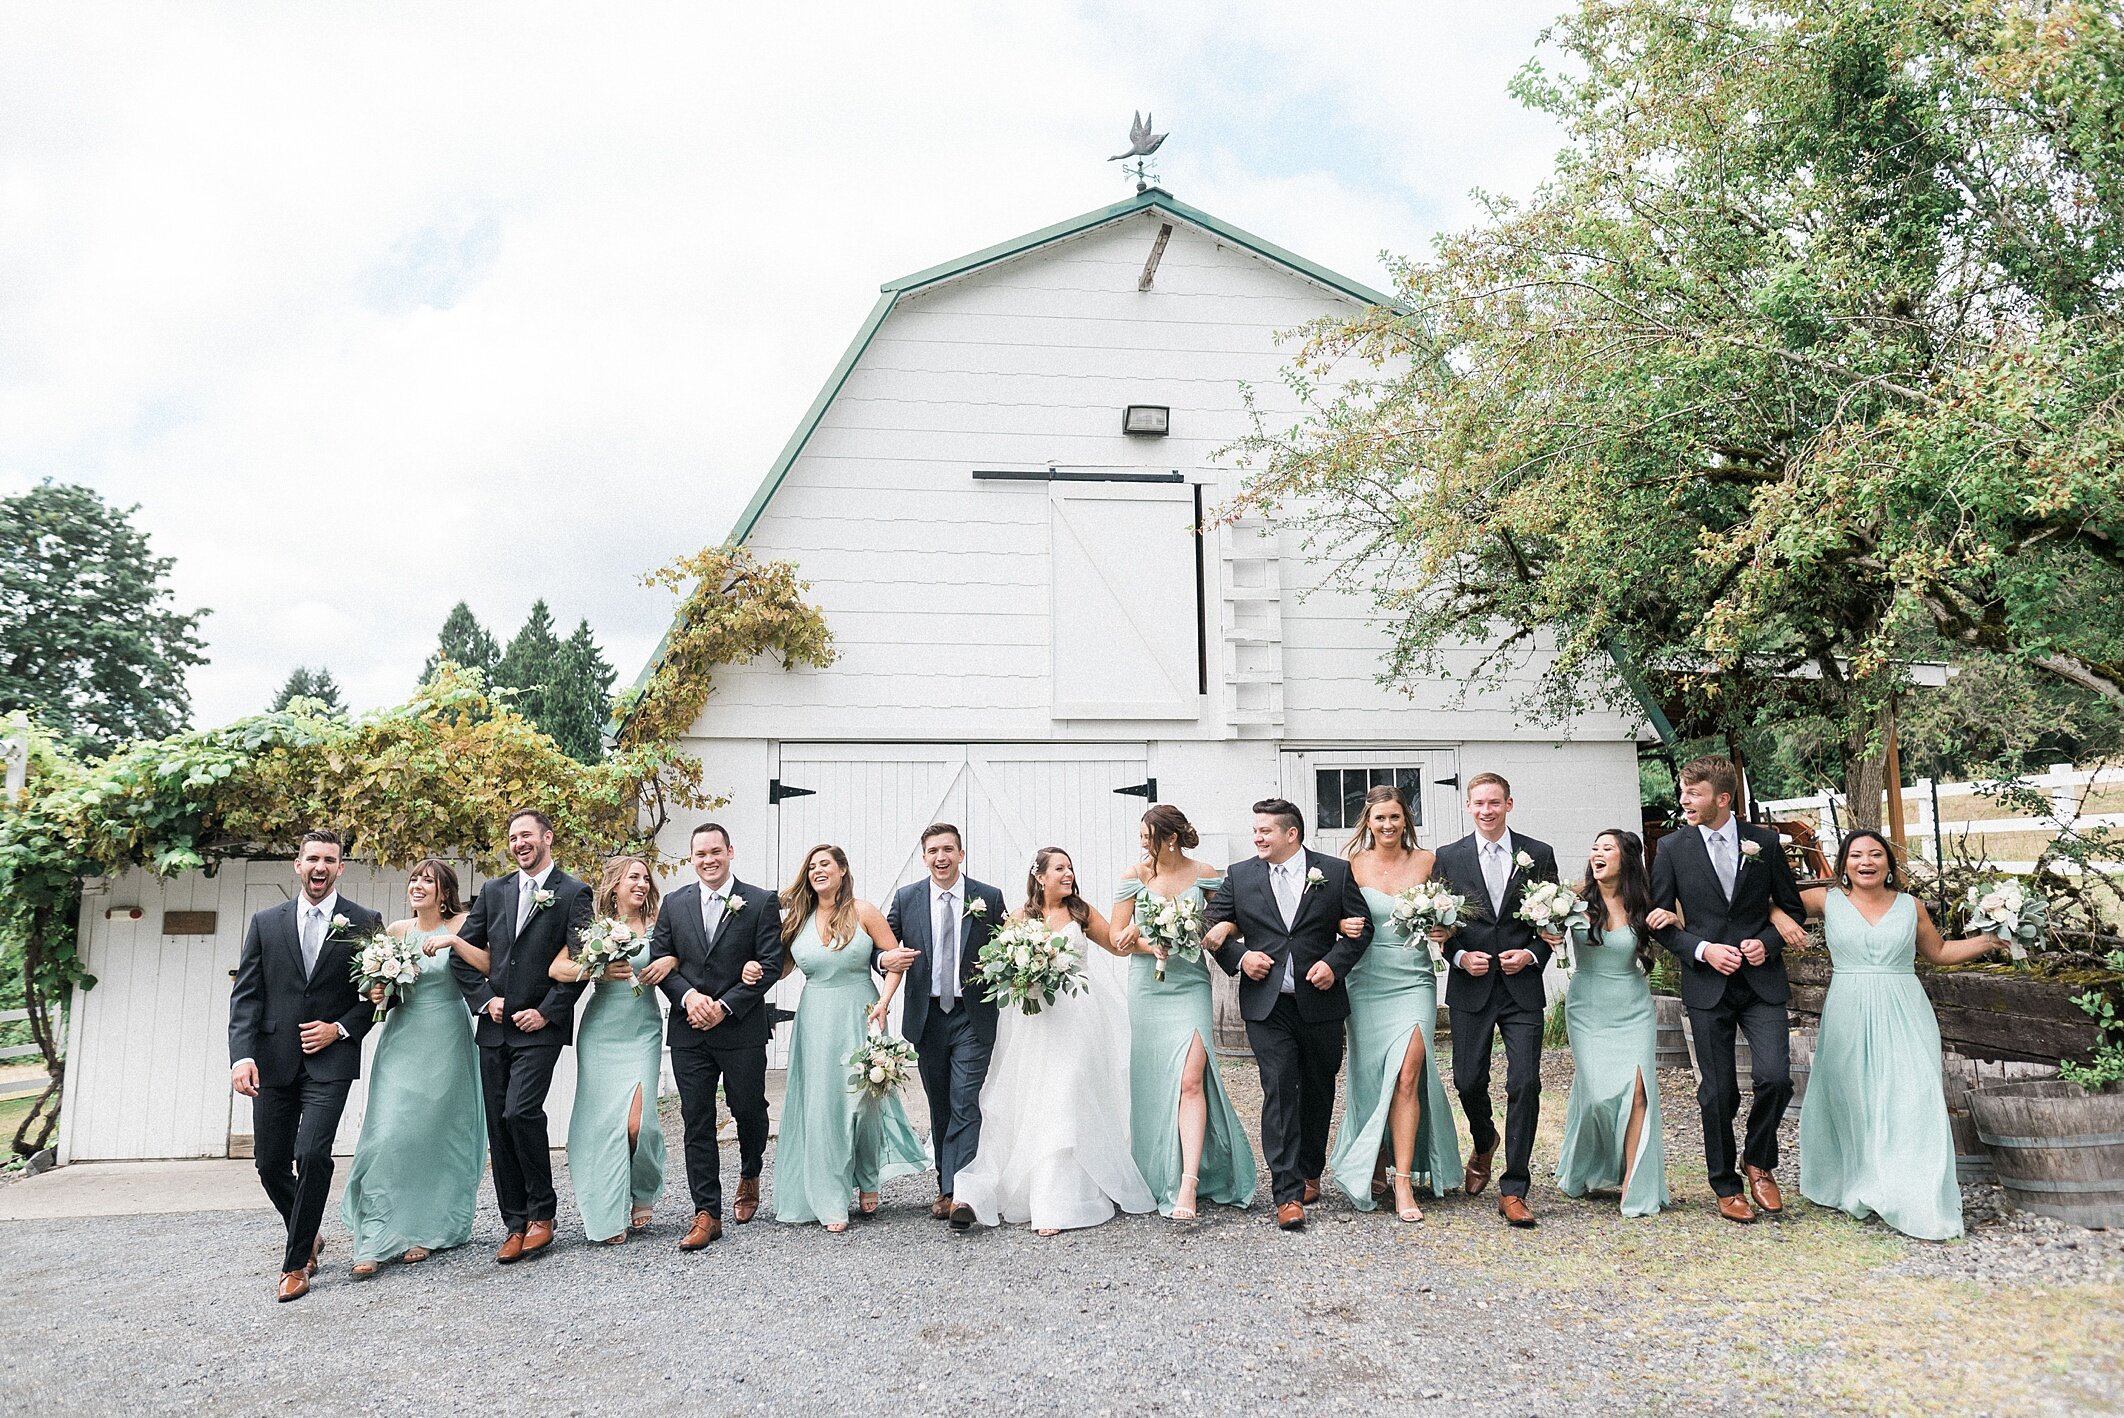 Wedding photo in front of the white barn at Chateau Lill